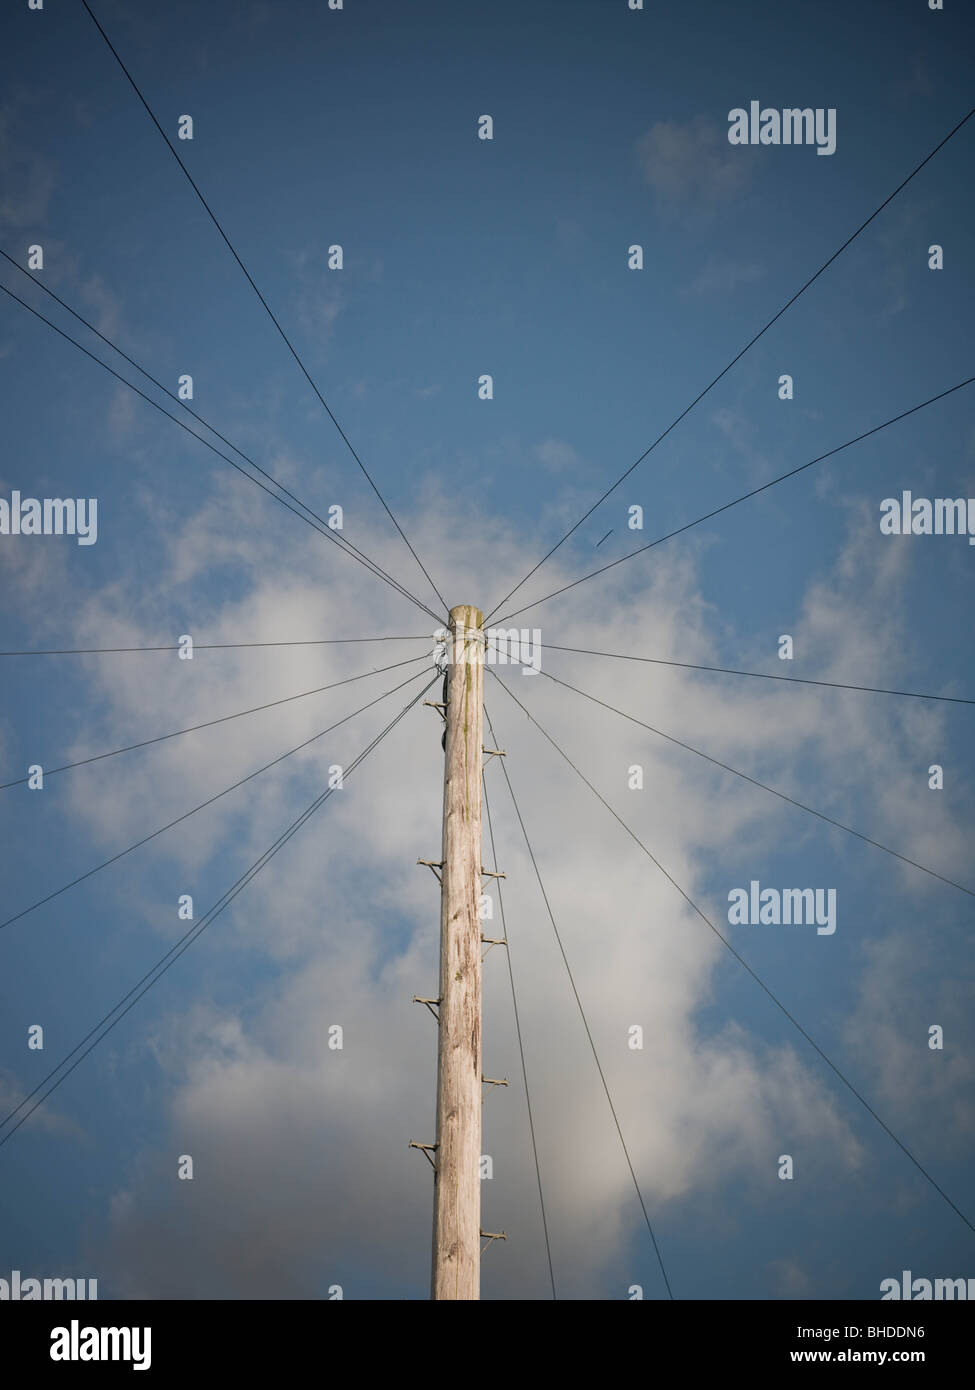 Wooden telegraph pole with phone lines against blue sky. Stock Photo